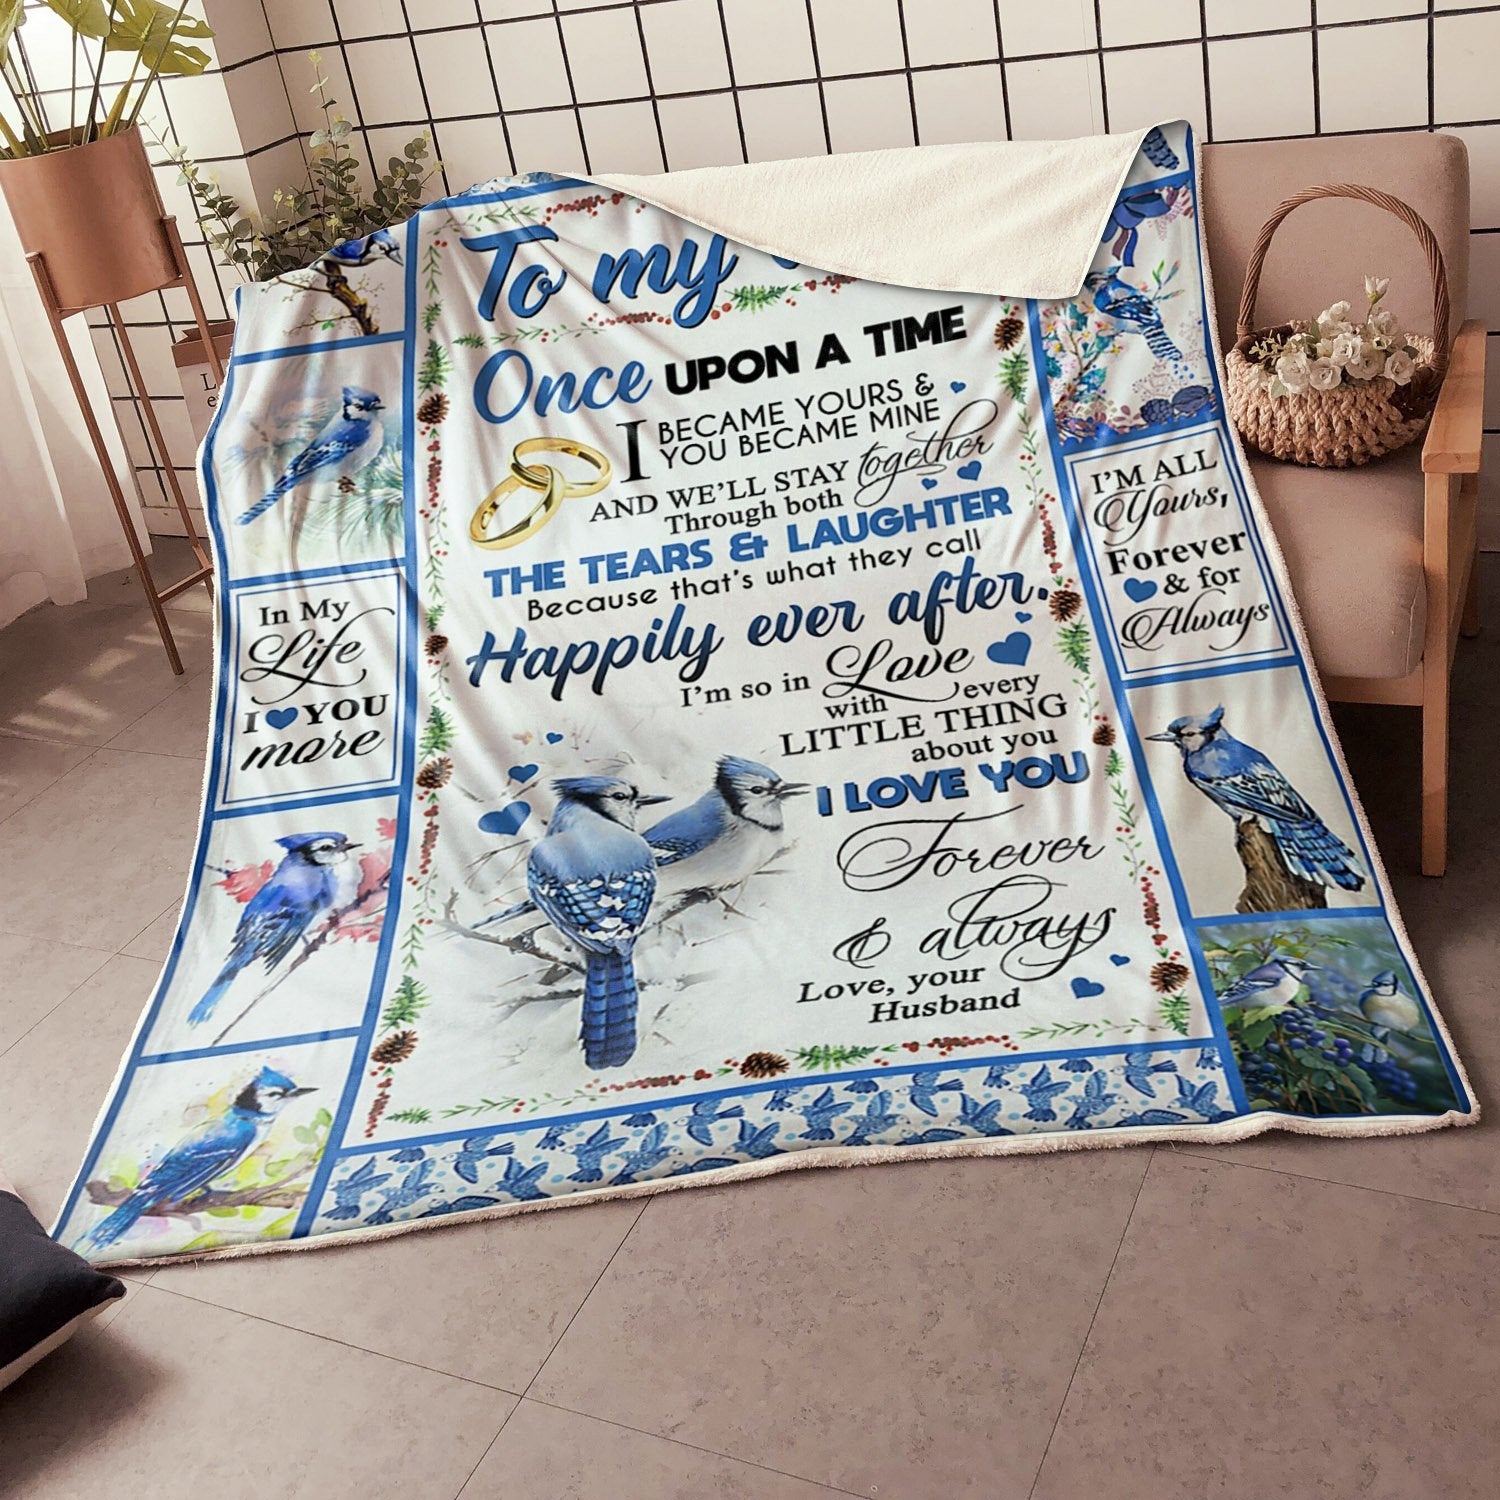 My Wife Cardinal Couple Once Upon A Time Happily Ever After Gift From Husband Fleece Blanket - Quilt Blanket